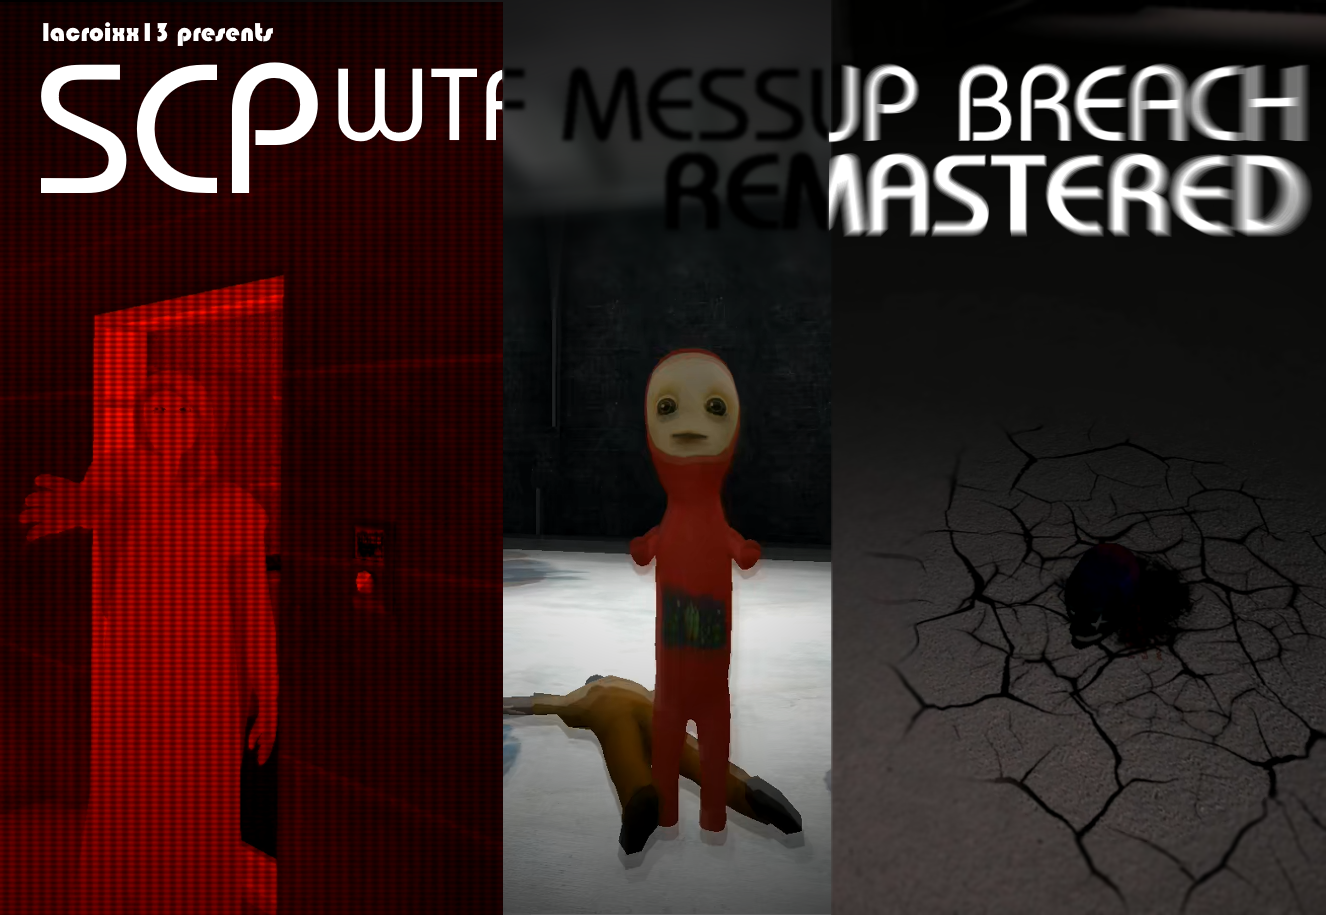 Scp Wtf Messup Breach Remastered Mod Mod Db